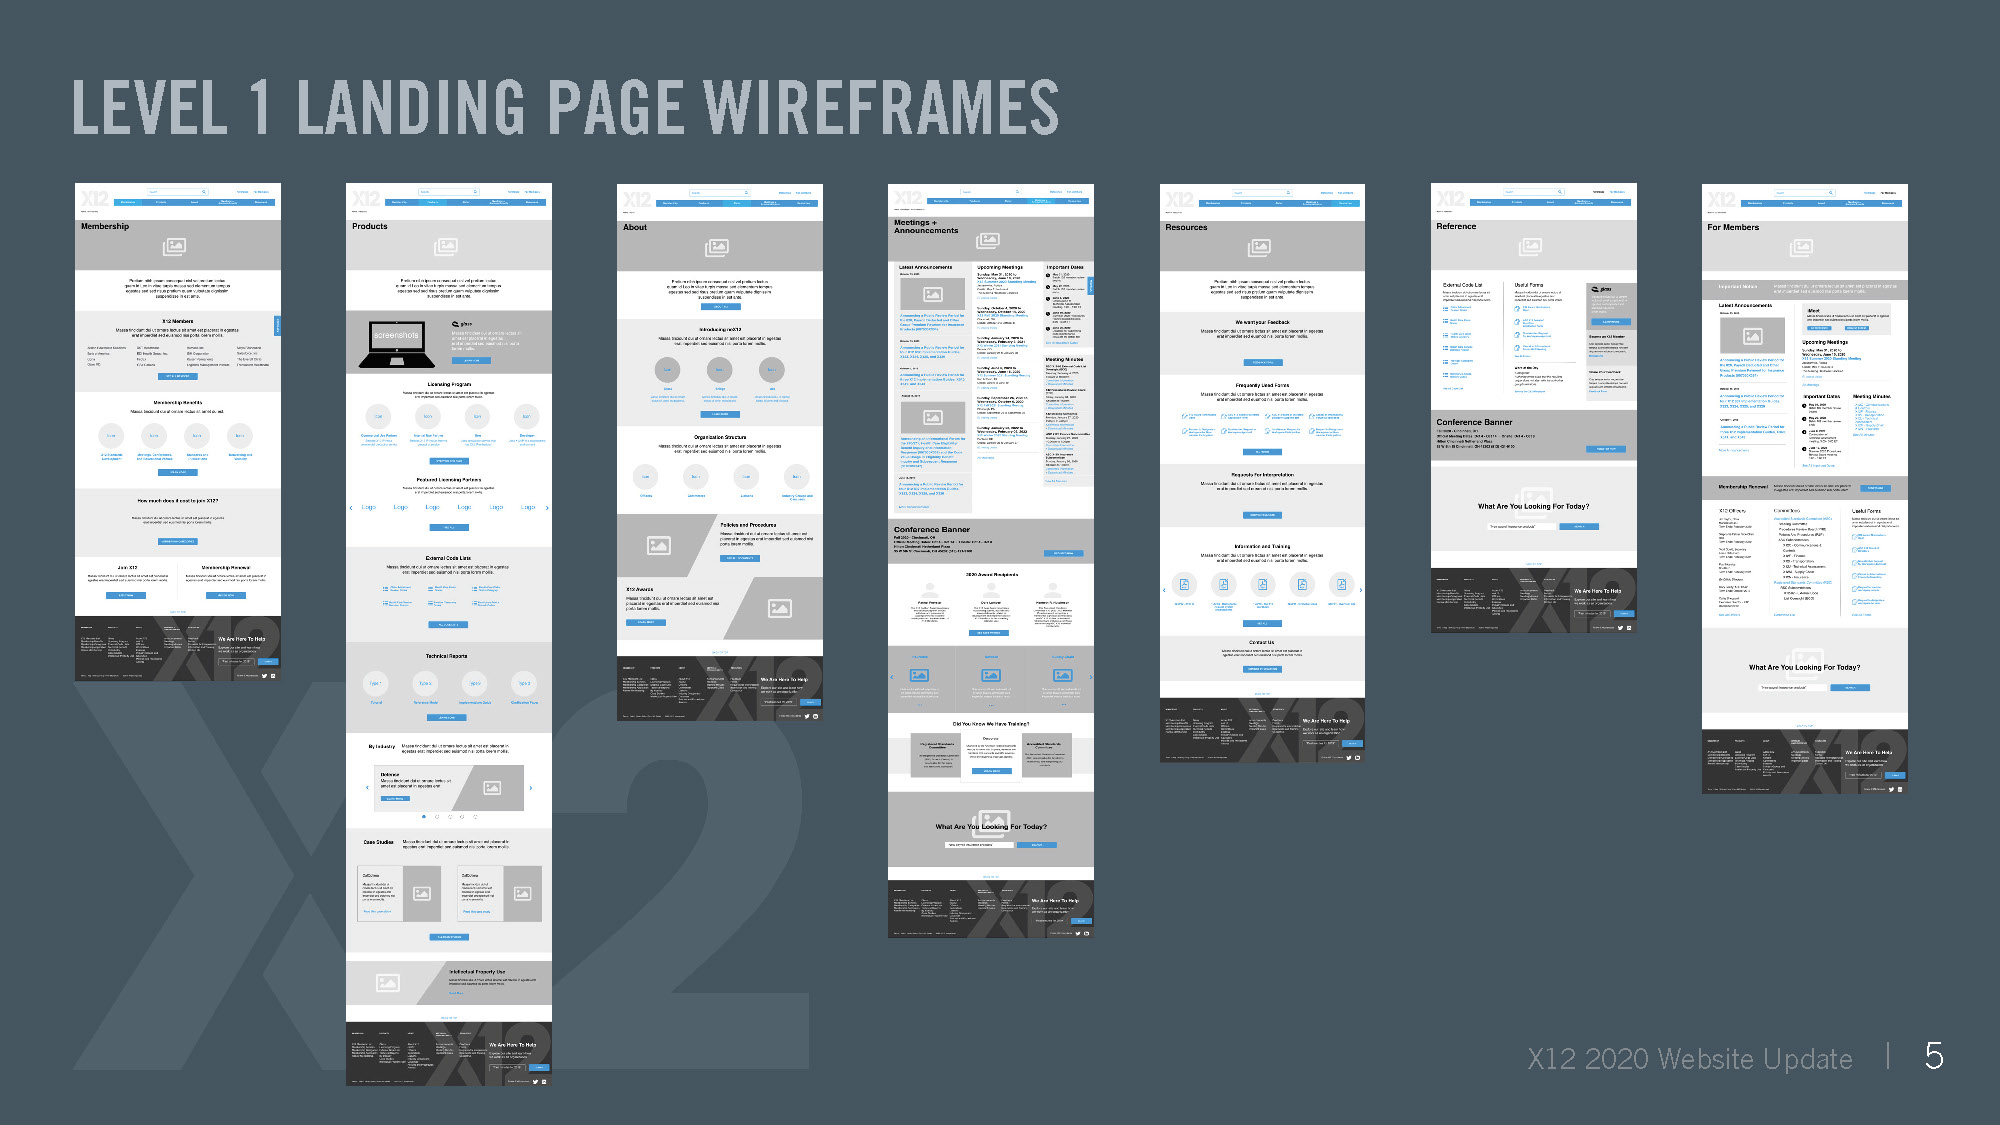 X12 Site Structure and Wireframes Presentation.